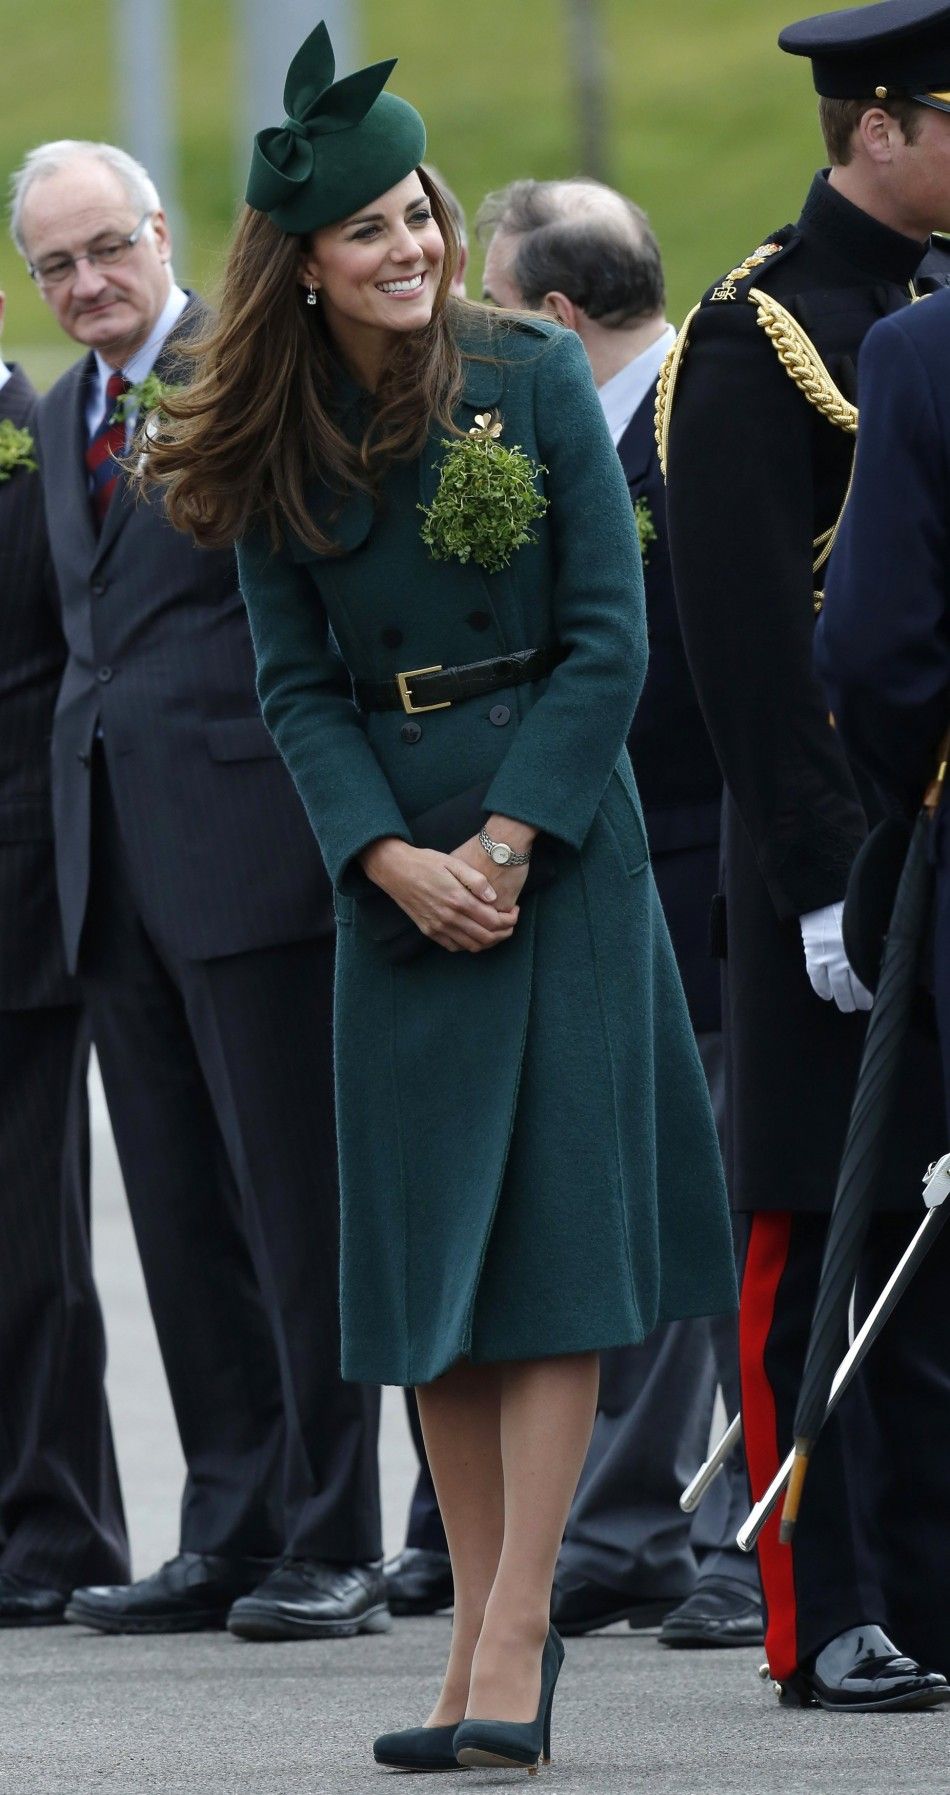 Britains Catherine, Duchess of Cambridge wears a sprig of shamrock during a visit with her husband Prince William to the 1st Battalion Irish Guards for a St Patricks Day Parade at Mons Barracks in Aldershot